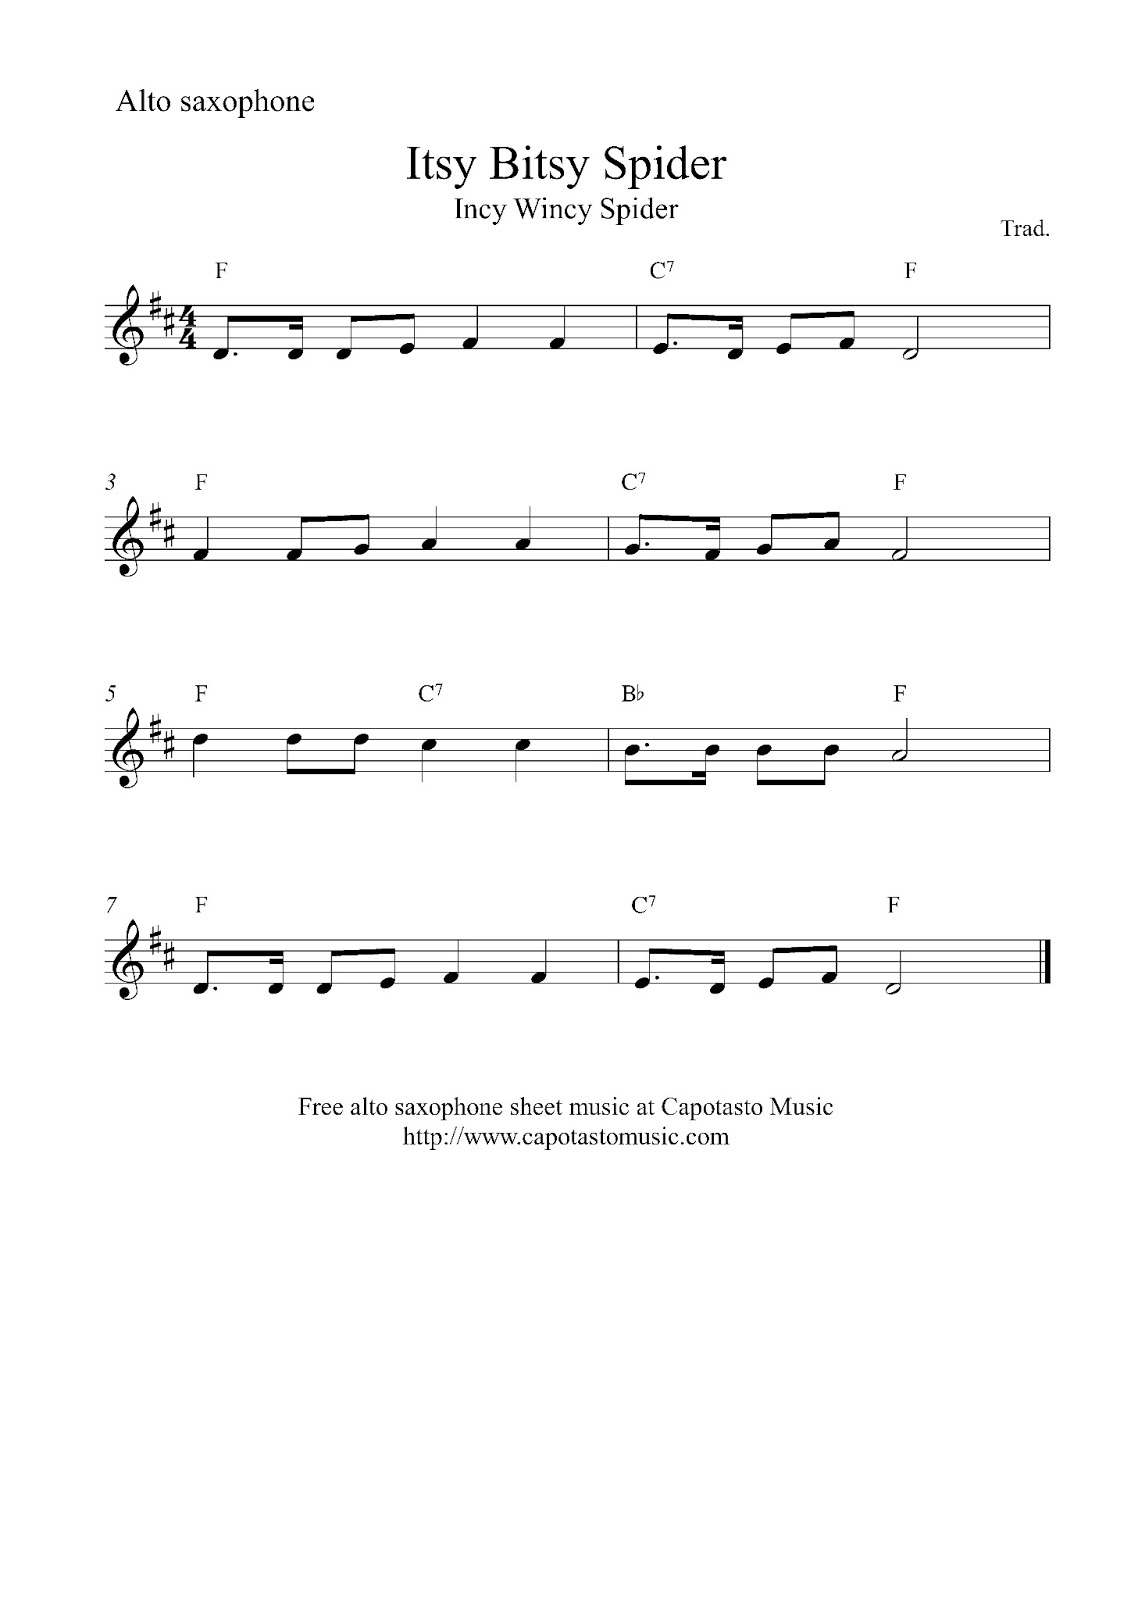 free-easy-alto-saxophone-sheet-music-itsy-bitsy-spider-incy-wincy-spider